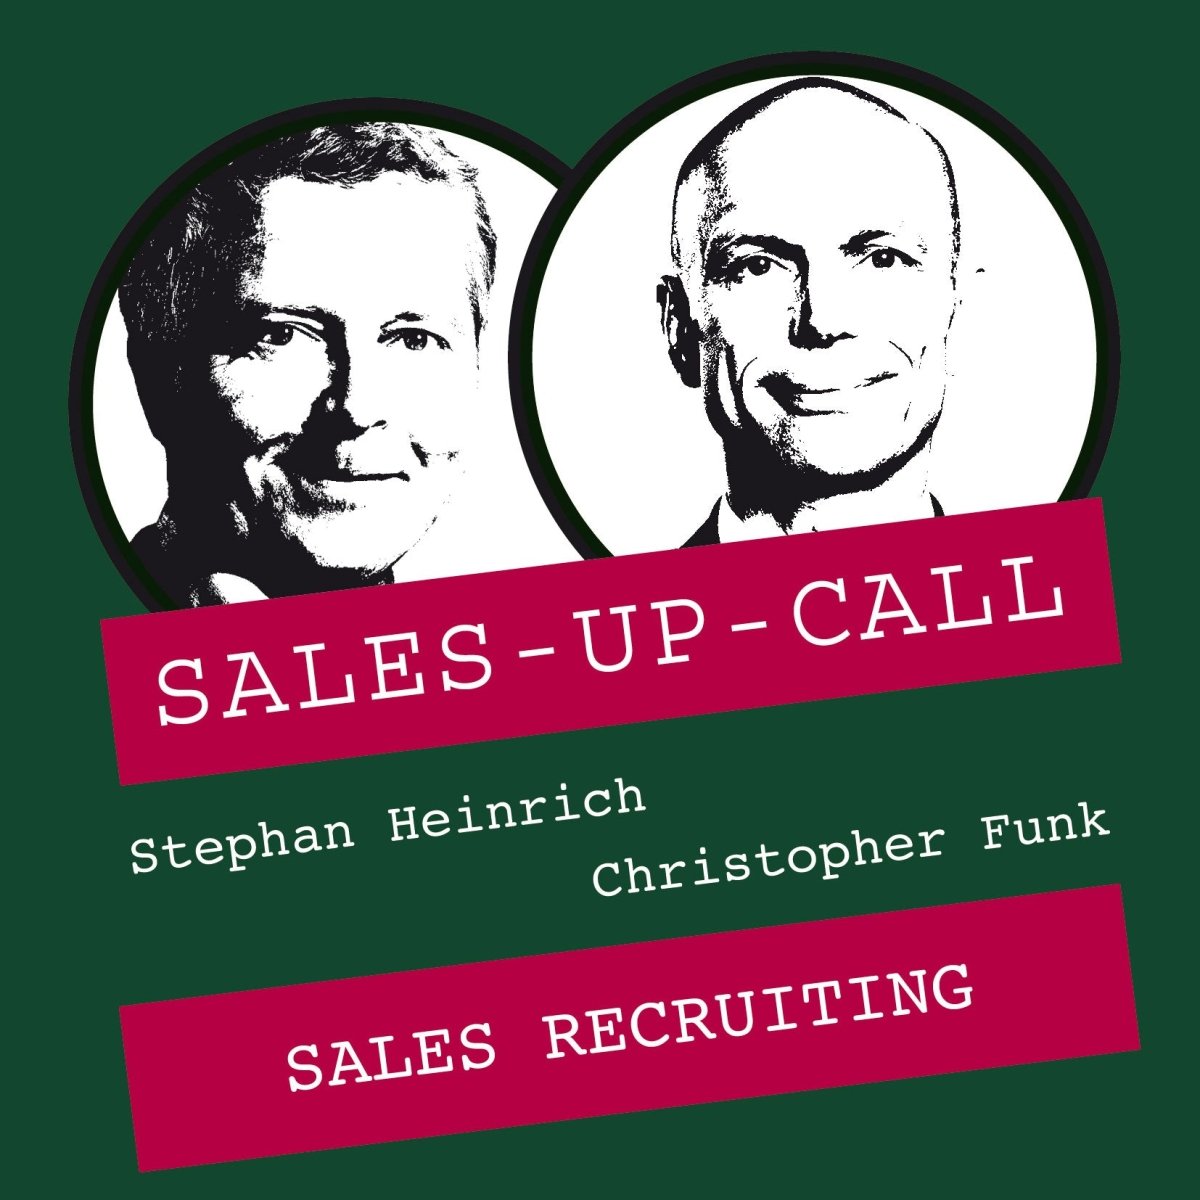 Sales Recruiting - Sales-up-Call - Stephan Heinrich